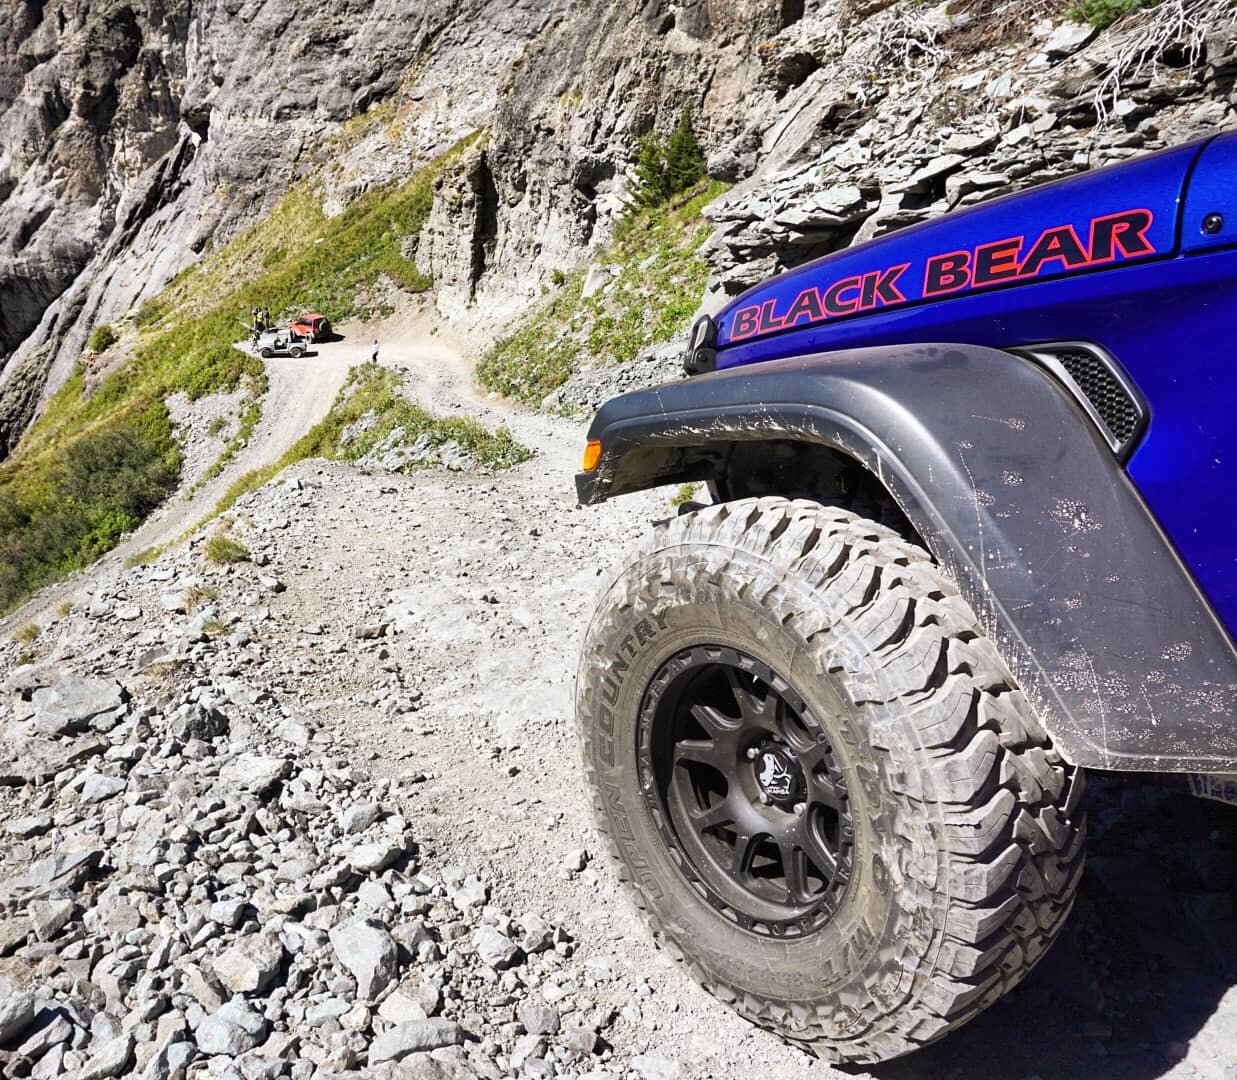 Black Bear Off-Road Built, Black Bear Pass Proven. We pushed everything to the extreme for and on this trip, and the reward is nothing more than bragging rights, great pictures, and life long memories. 

#blackbearbuilt #blackearpass #mambawheels #to